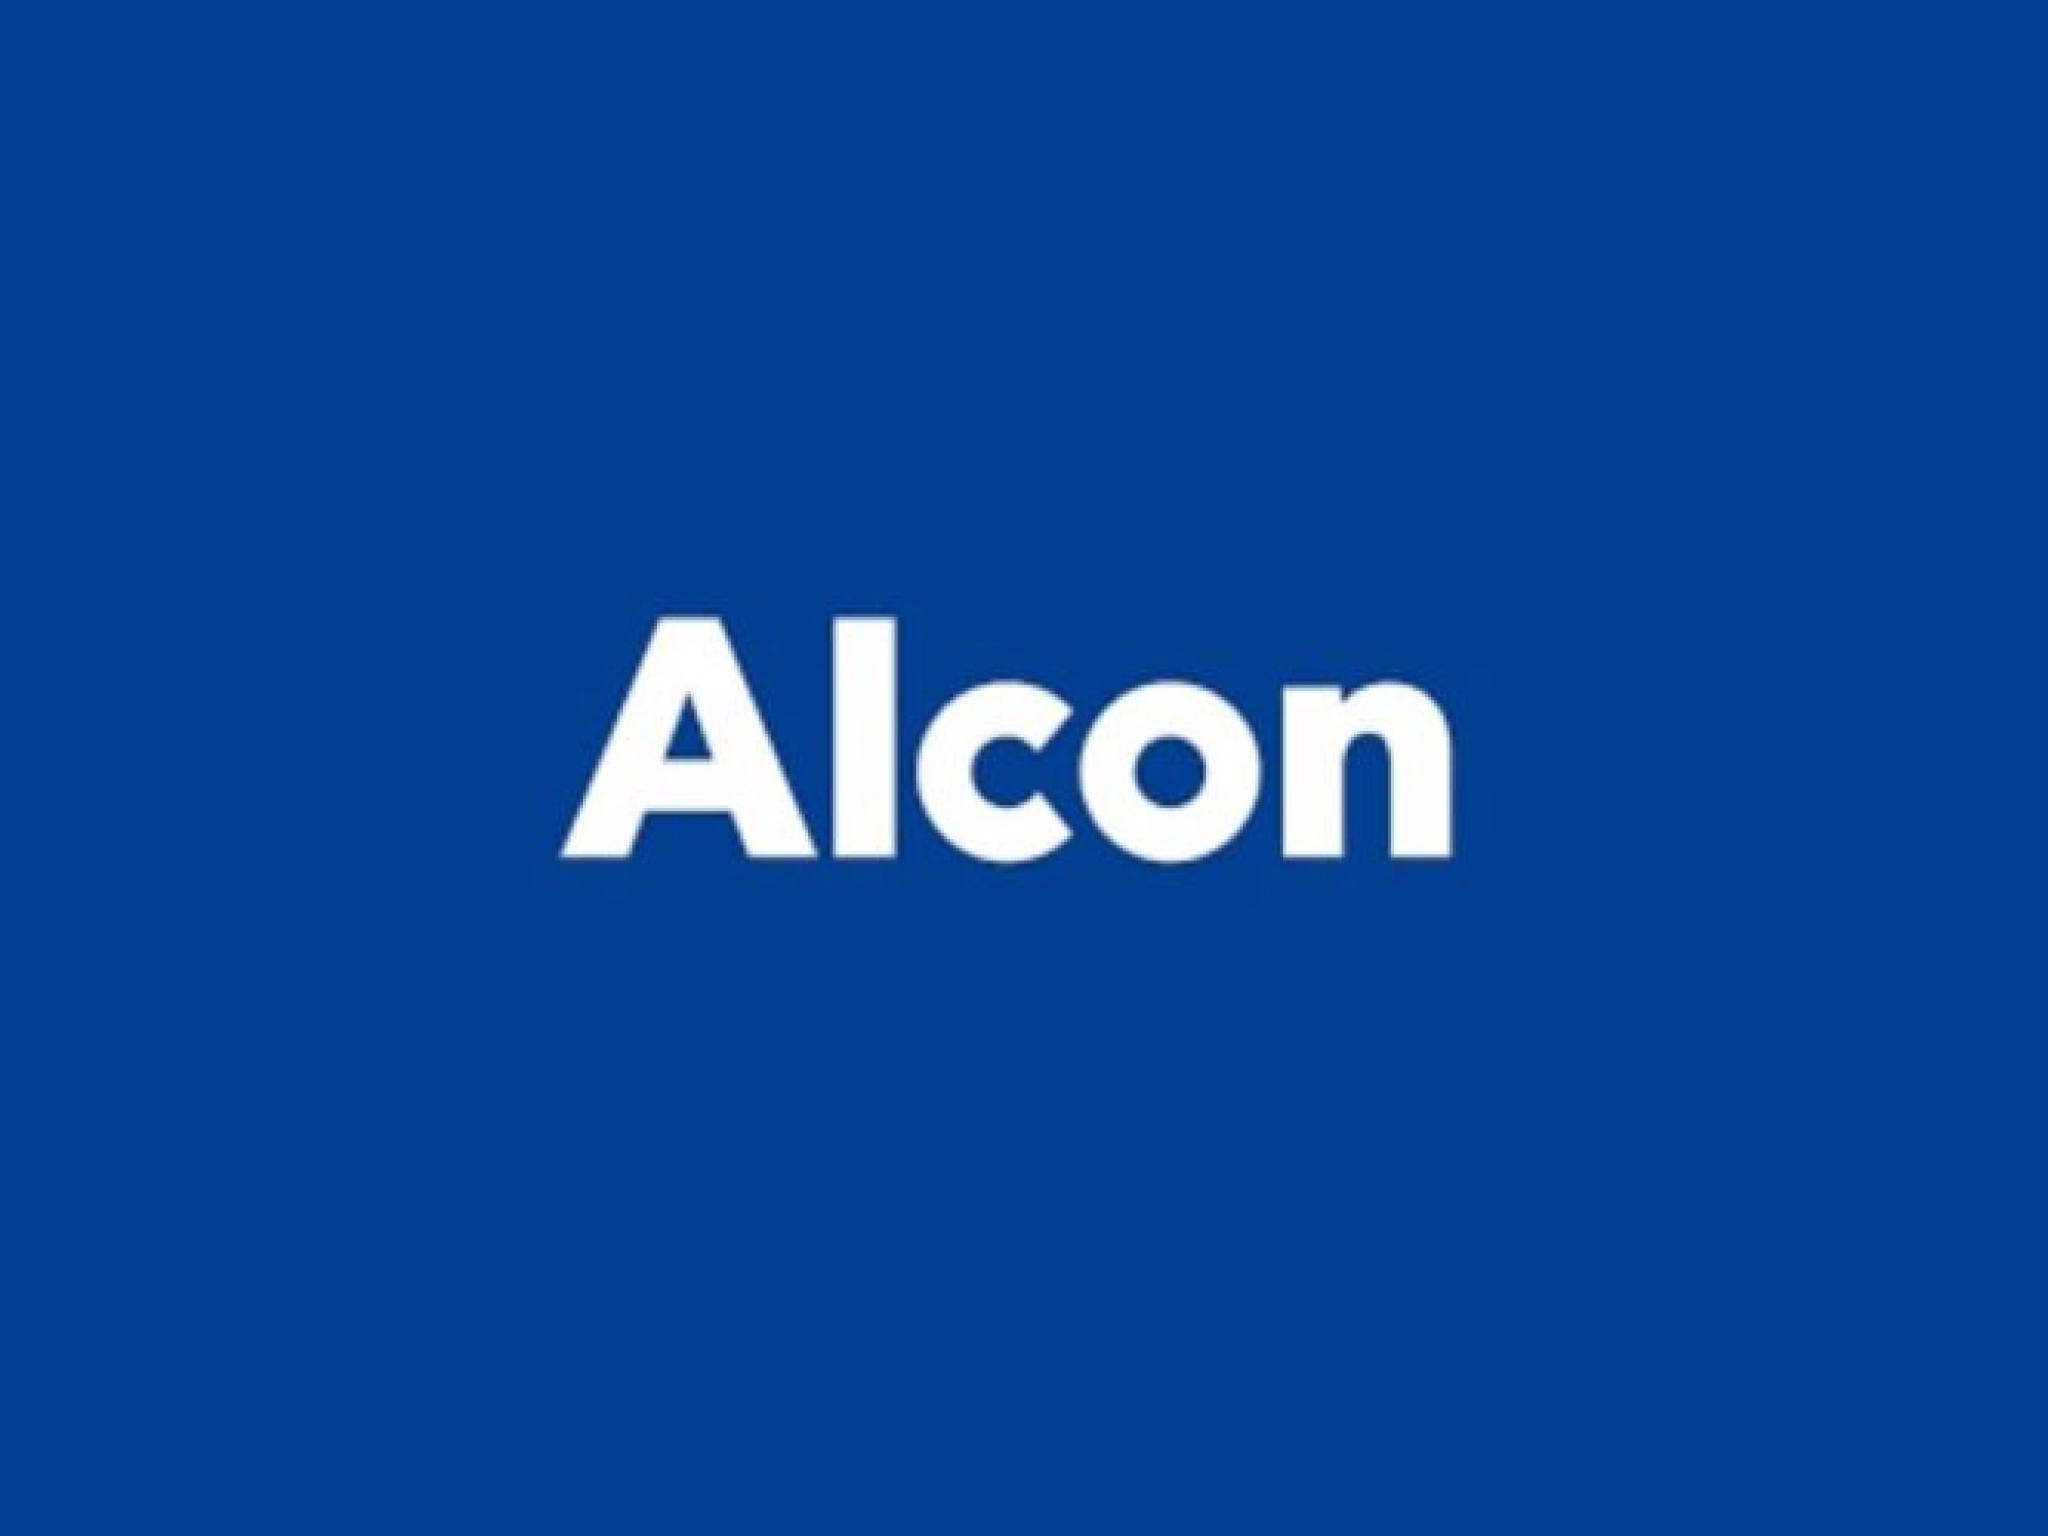  alcon-analysts-increase-their-forecasts-following-q1-results 